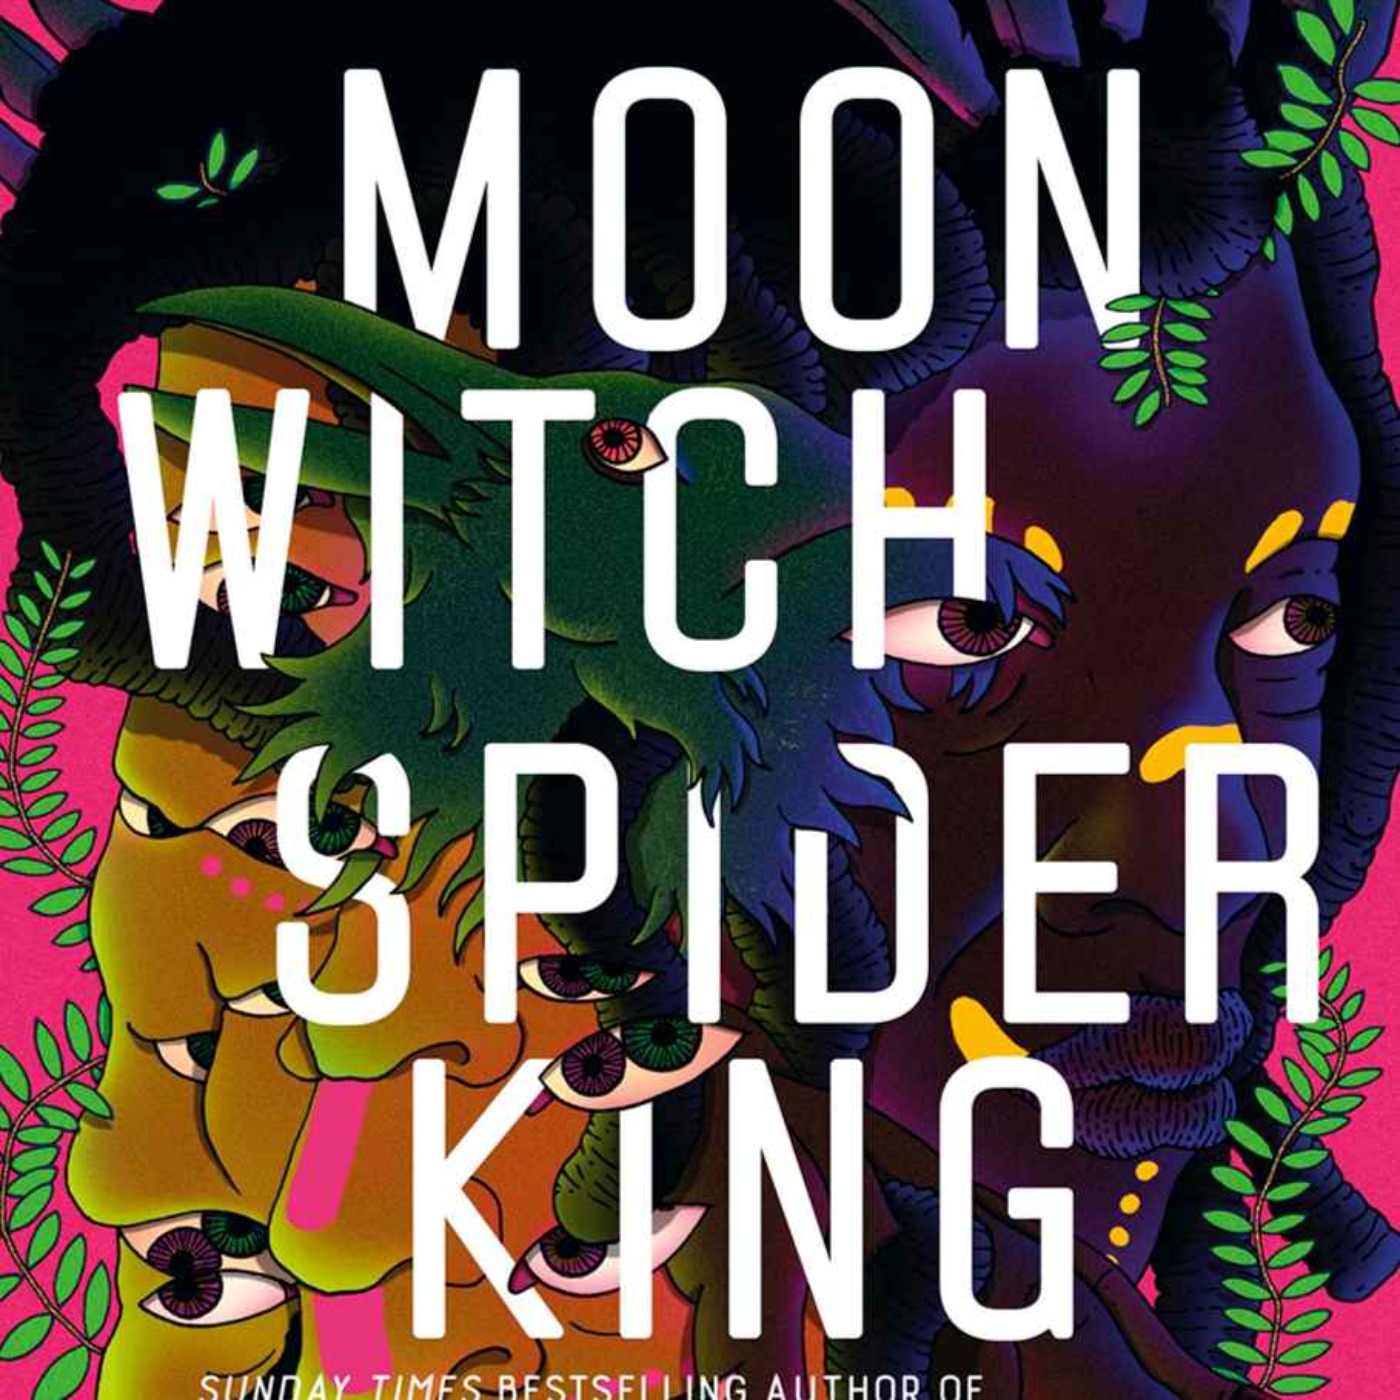 cover art for Little Atoms 739 - Marlon James' Moon Witch Spider King